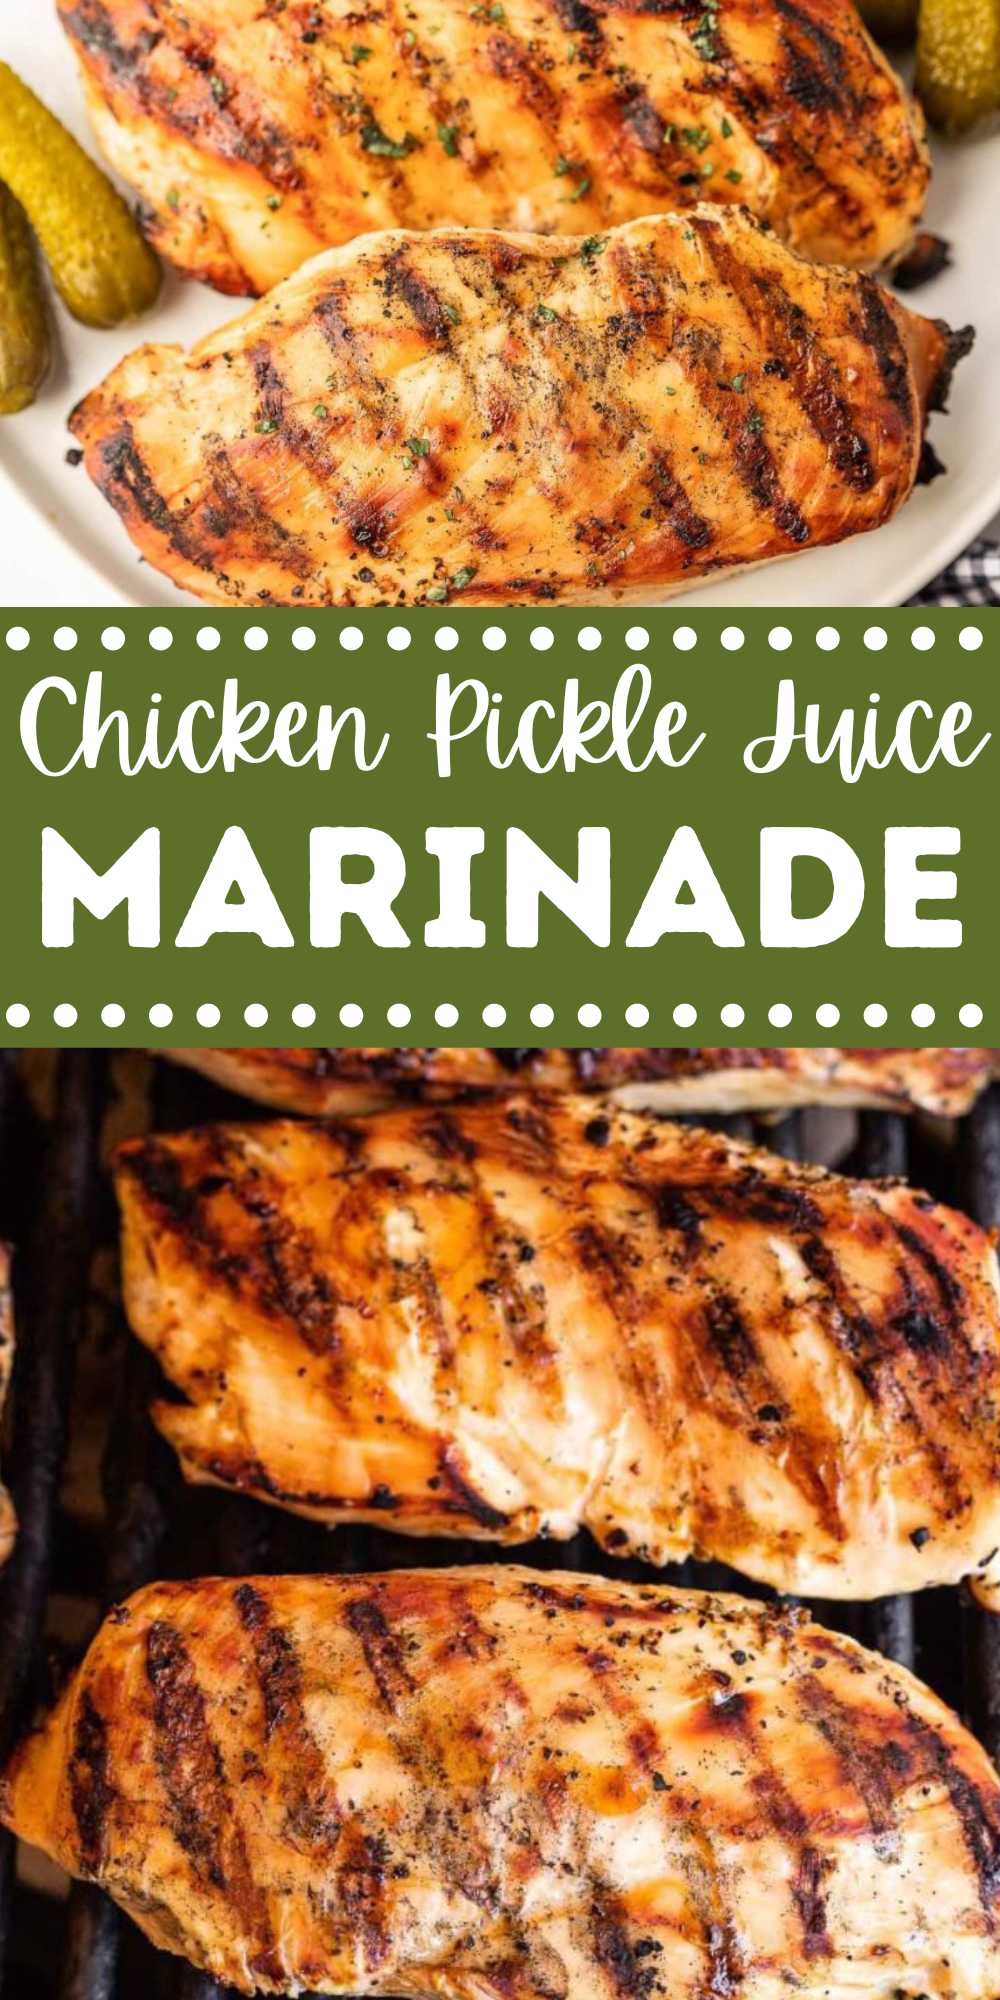 Chicken Pickle Juice Marinade makes chicken so tender with the perfect amount of twang. Each bite of pickle brine chicken is so juicy. The marinade for all your chicken recipes. #eatingonadime #chickenpicklejuicemarinade #marinade #picklejuice